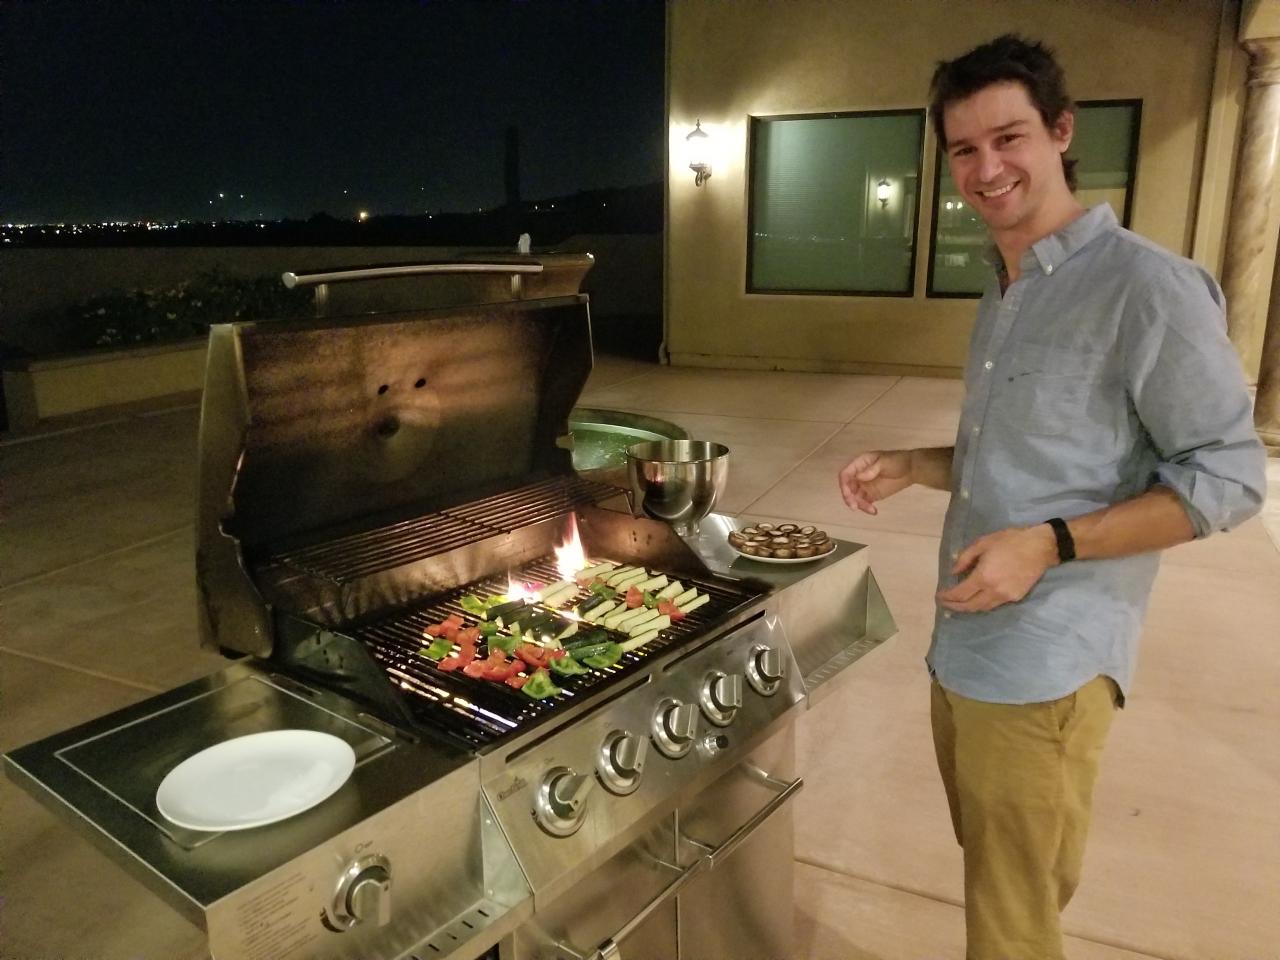 Mike at the grill